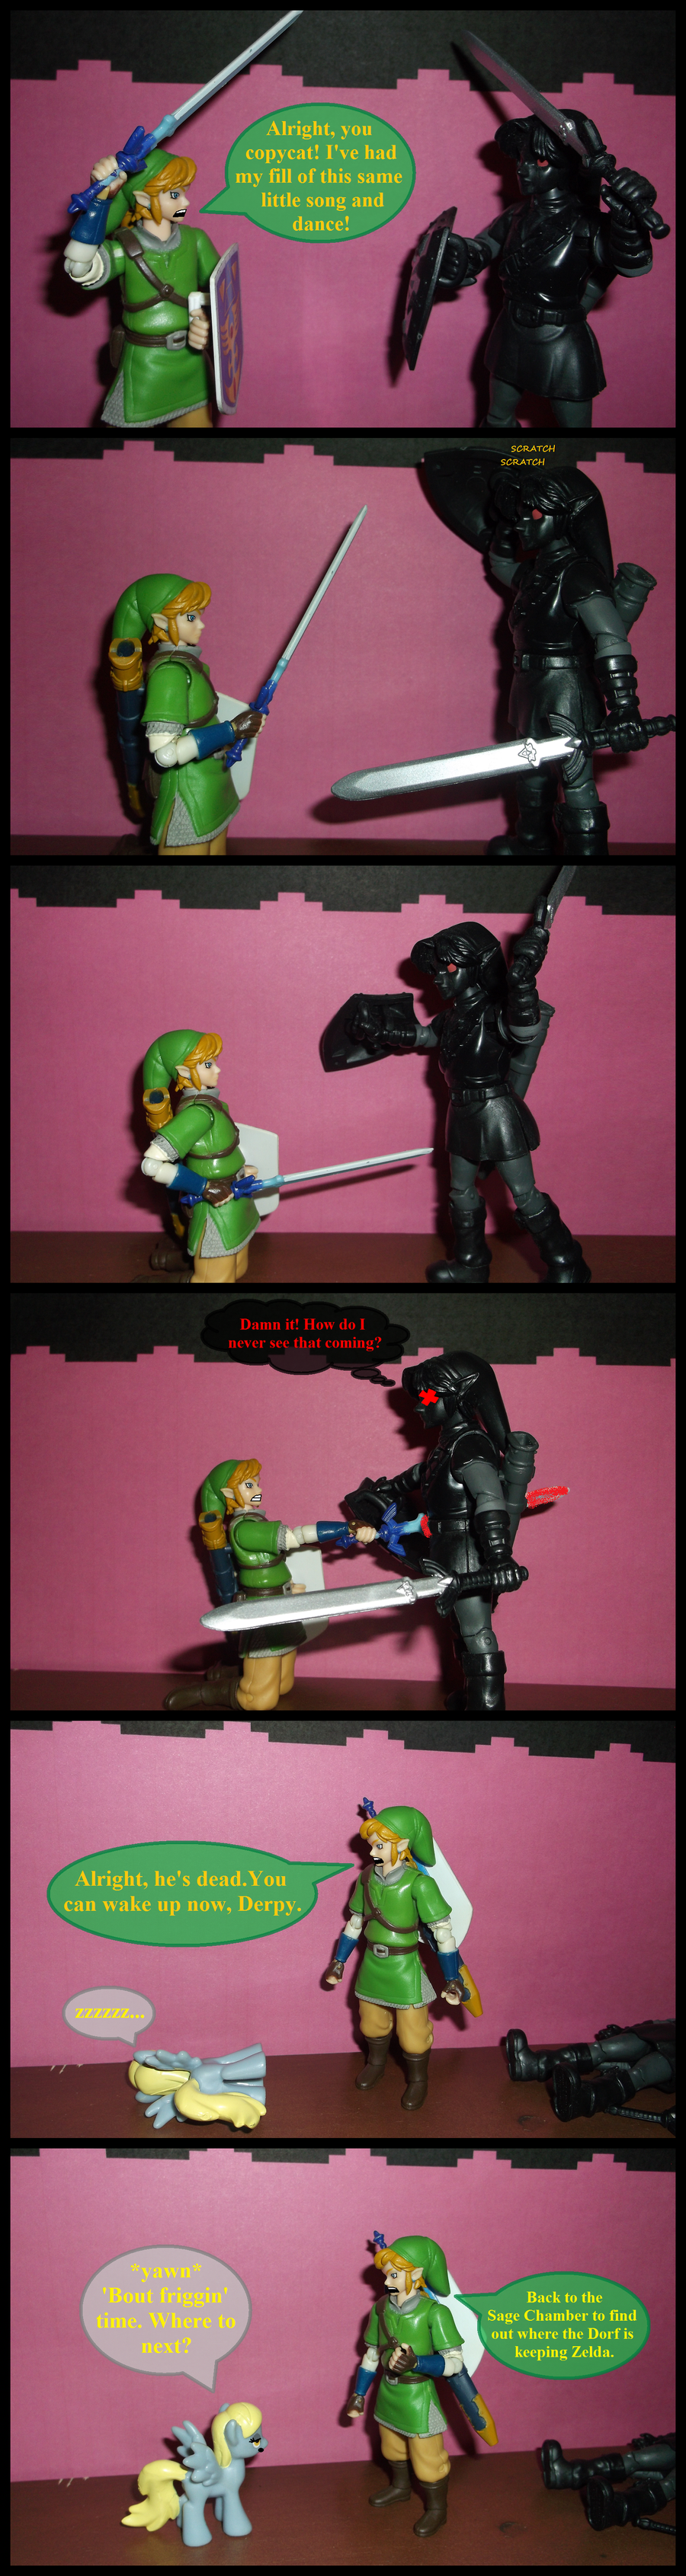 the_legend_of_zelda__pain_in_the_ass__pt__39__by_therockinstallion-db8v73c.png